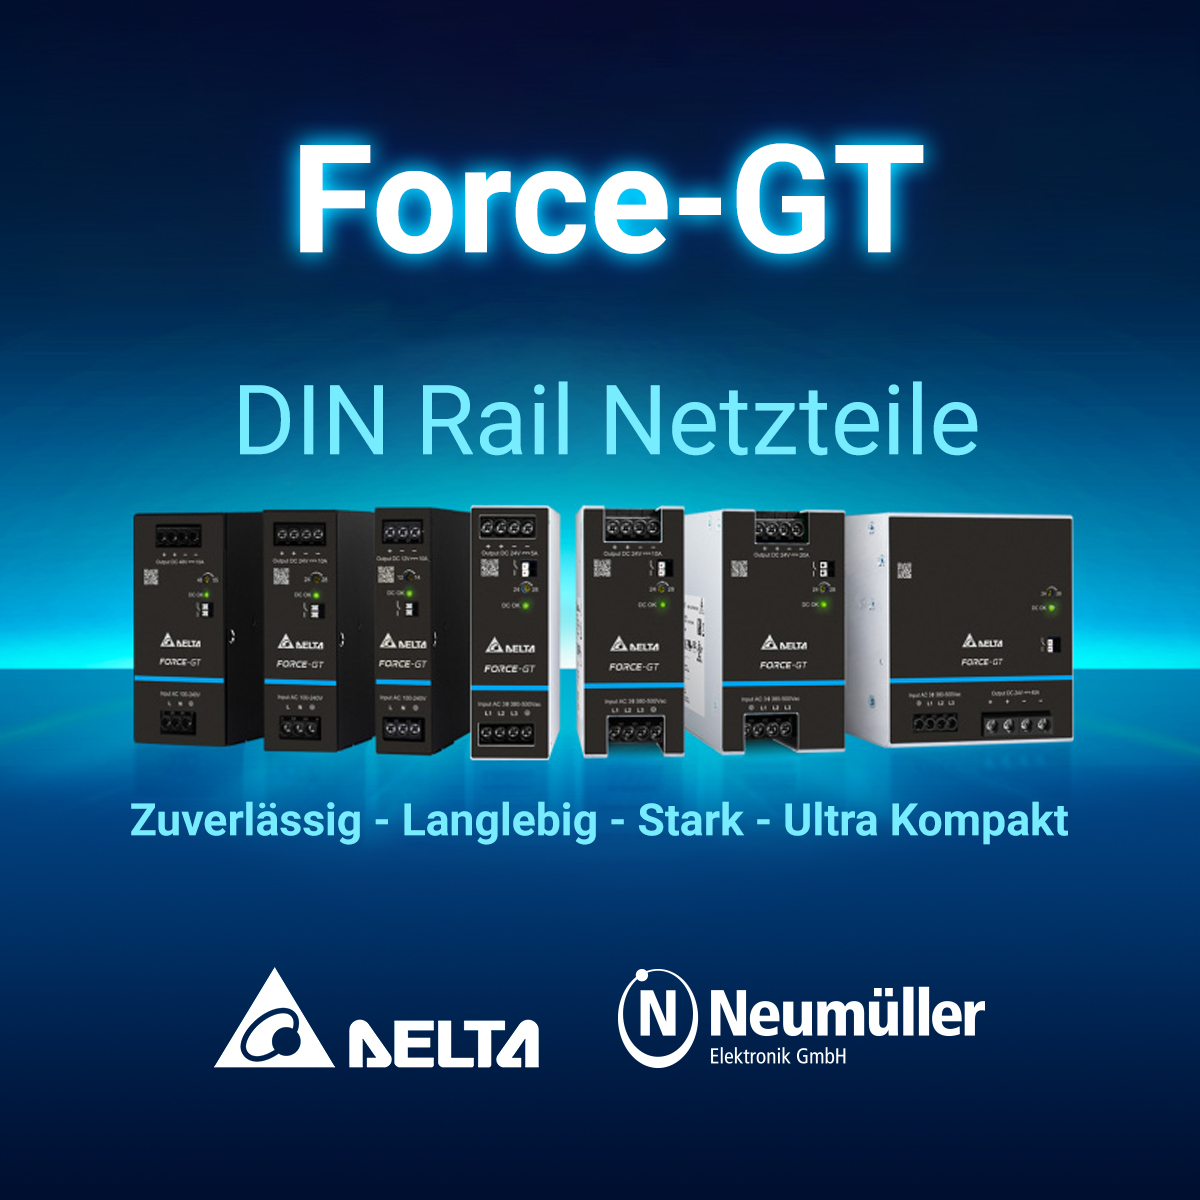 Force-GT Series from Delta Electronics